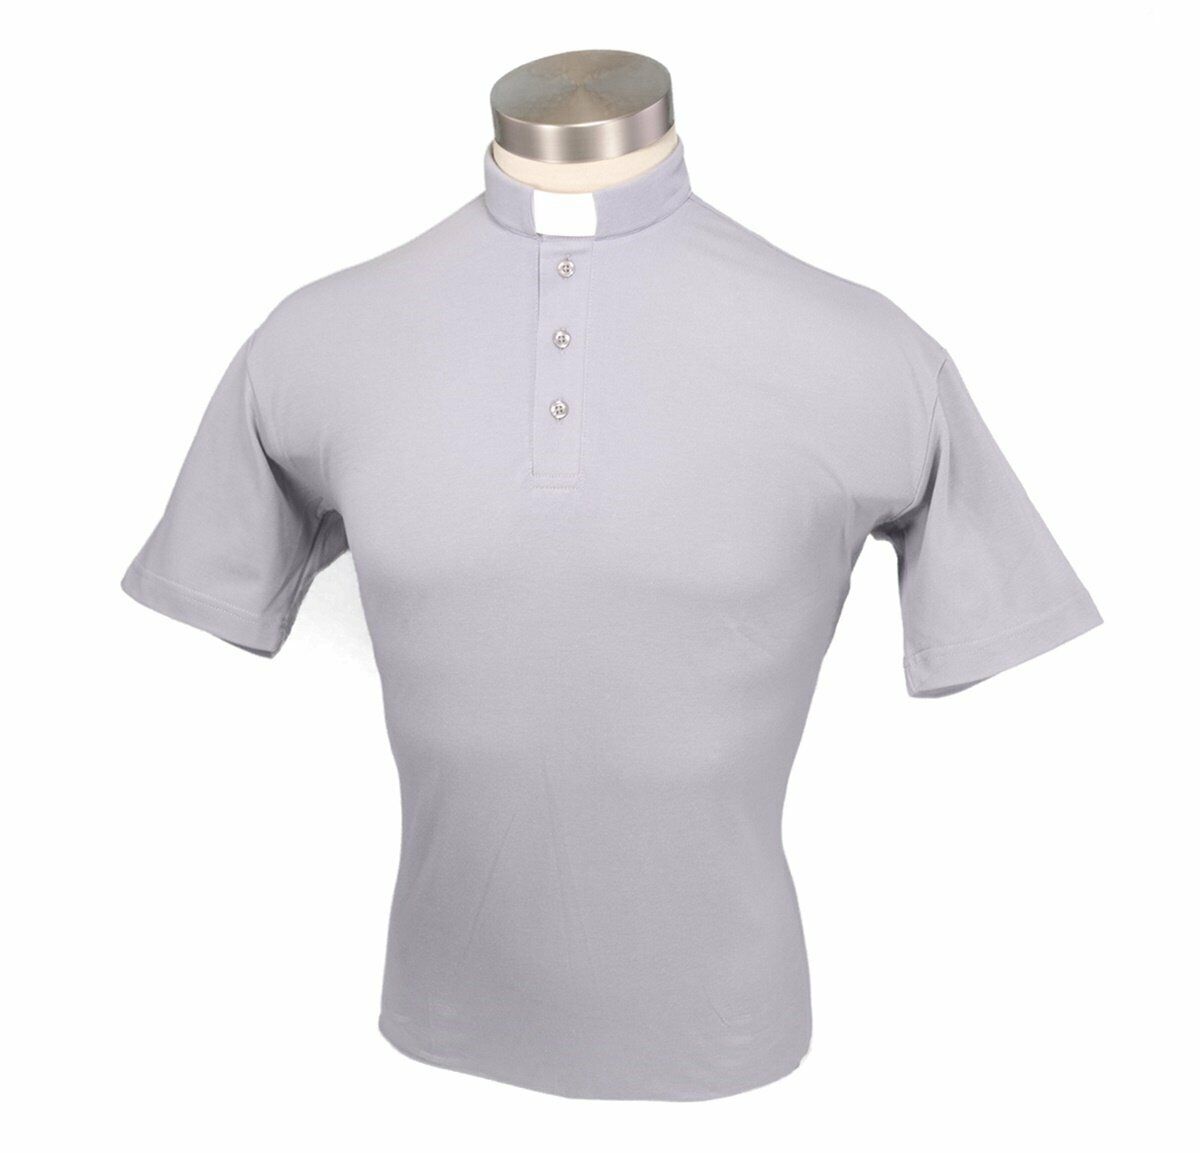 Liturgical Creations Mens Cotton Short Sleeve Clergy Polo Shirt, Extra Large